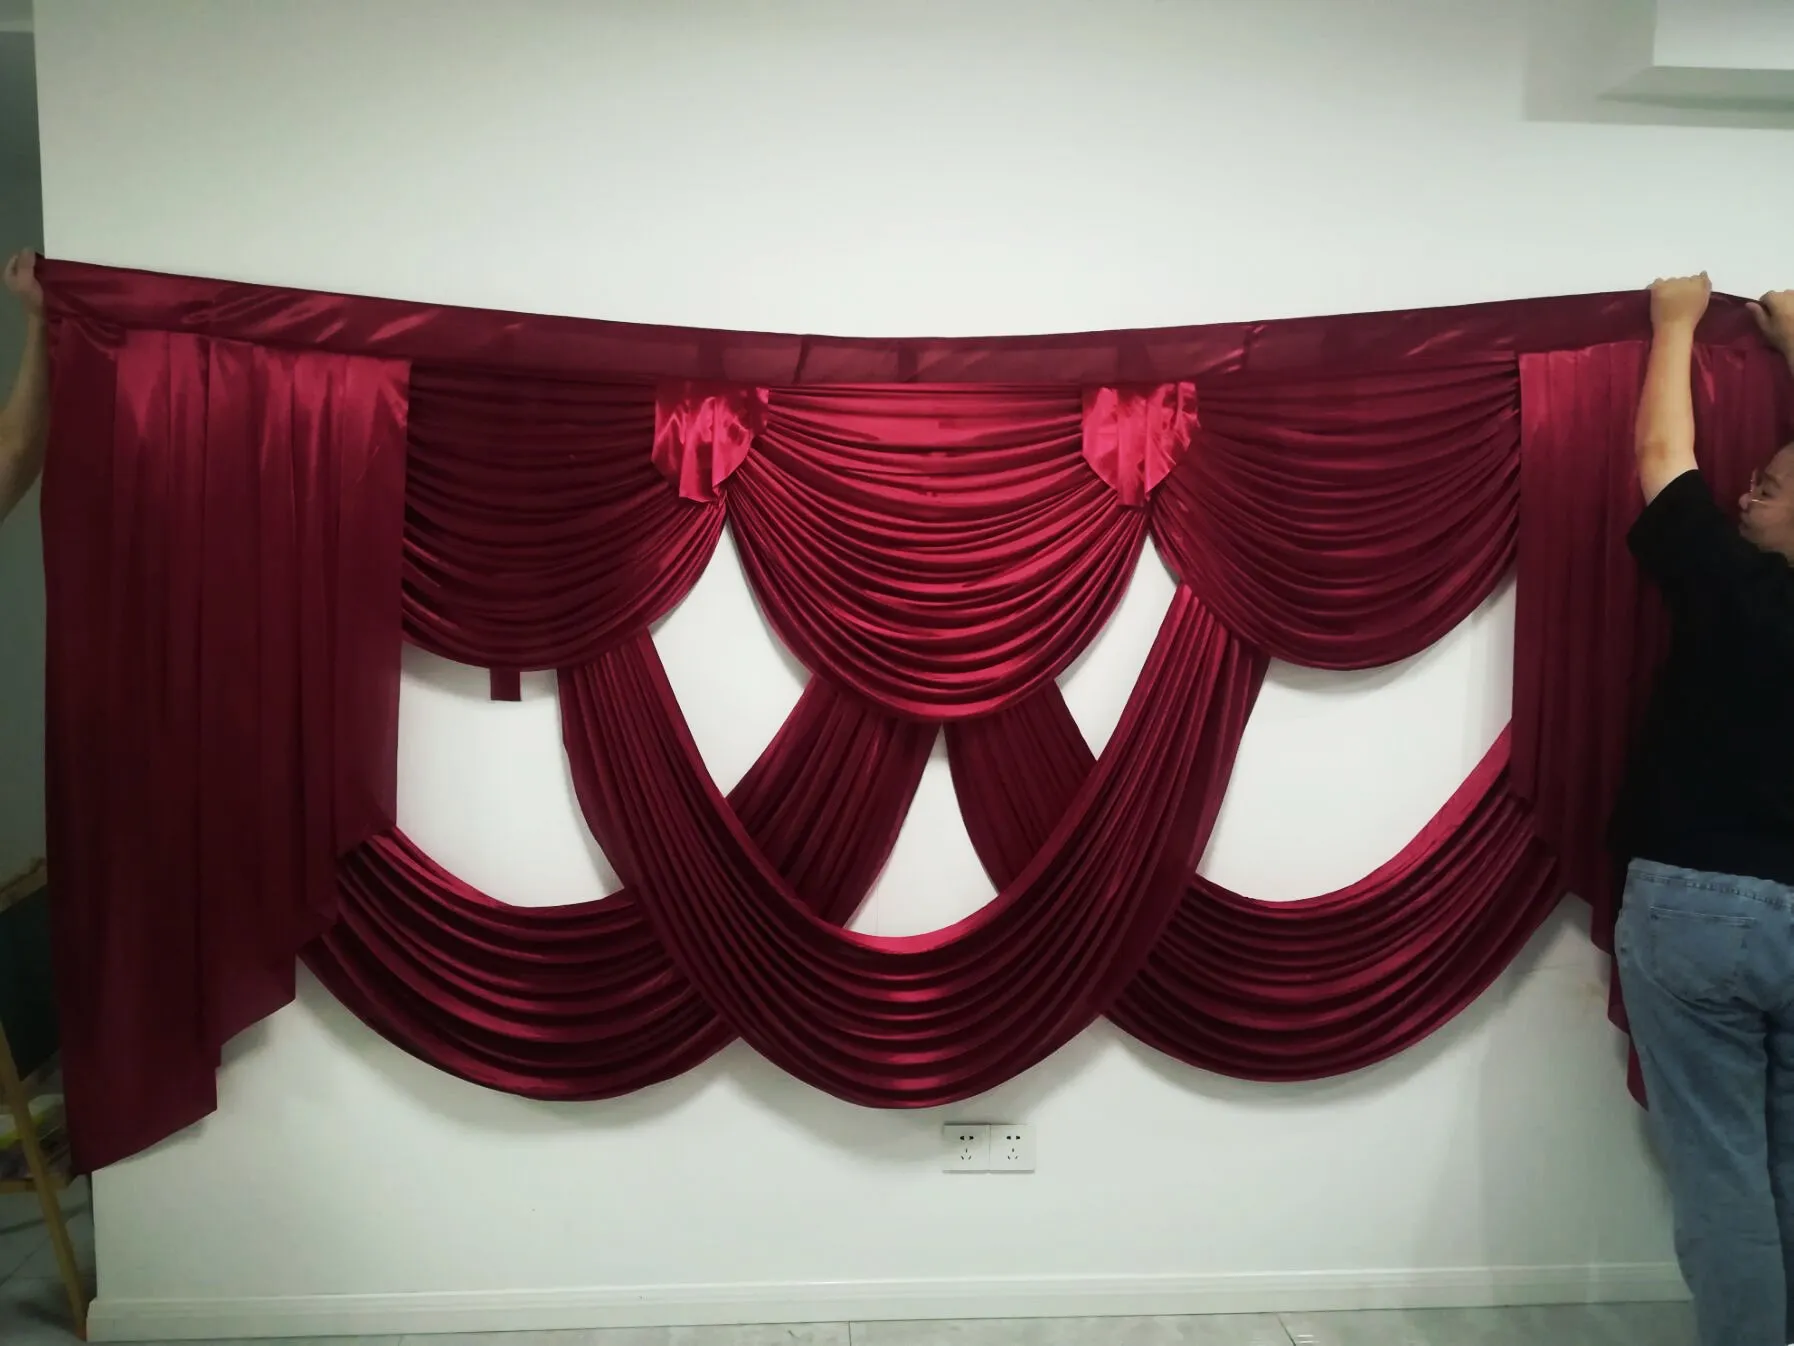 10ft Wid Burgundy Color Wedding Curtain Swags Backdrop Party Wedding Decoration Swags Satin Wall Grapes347W